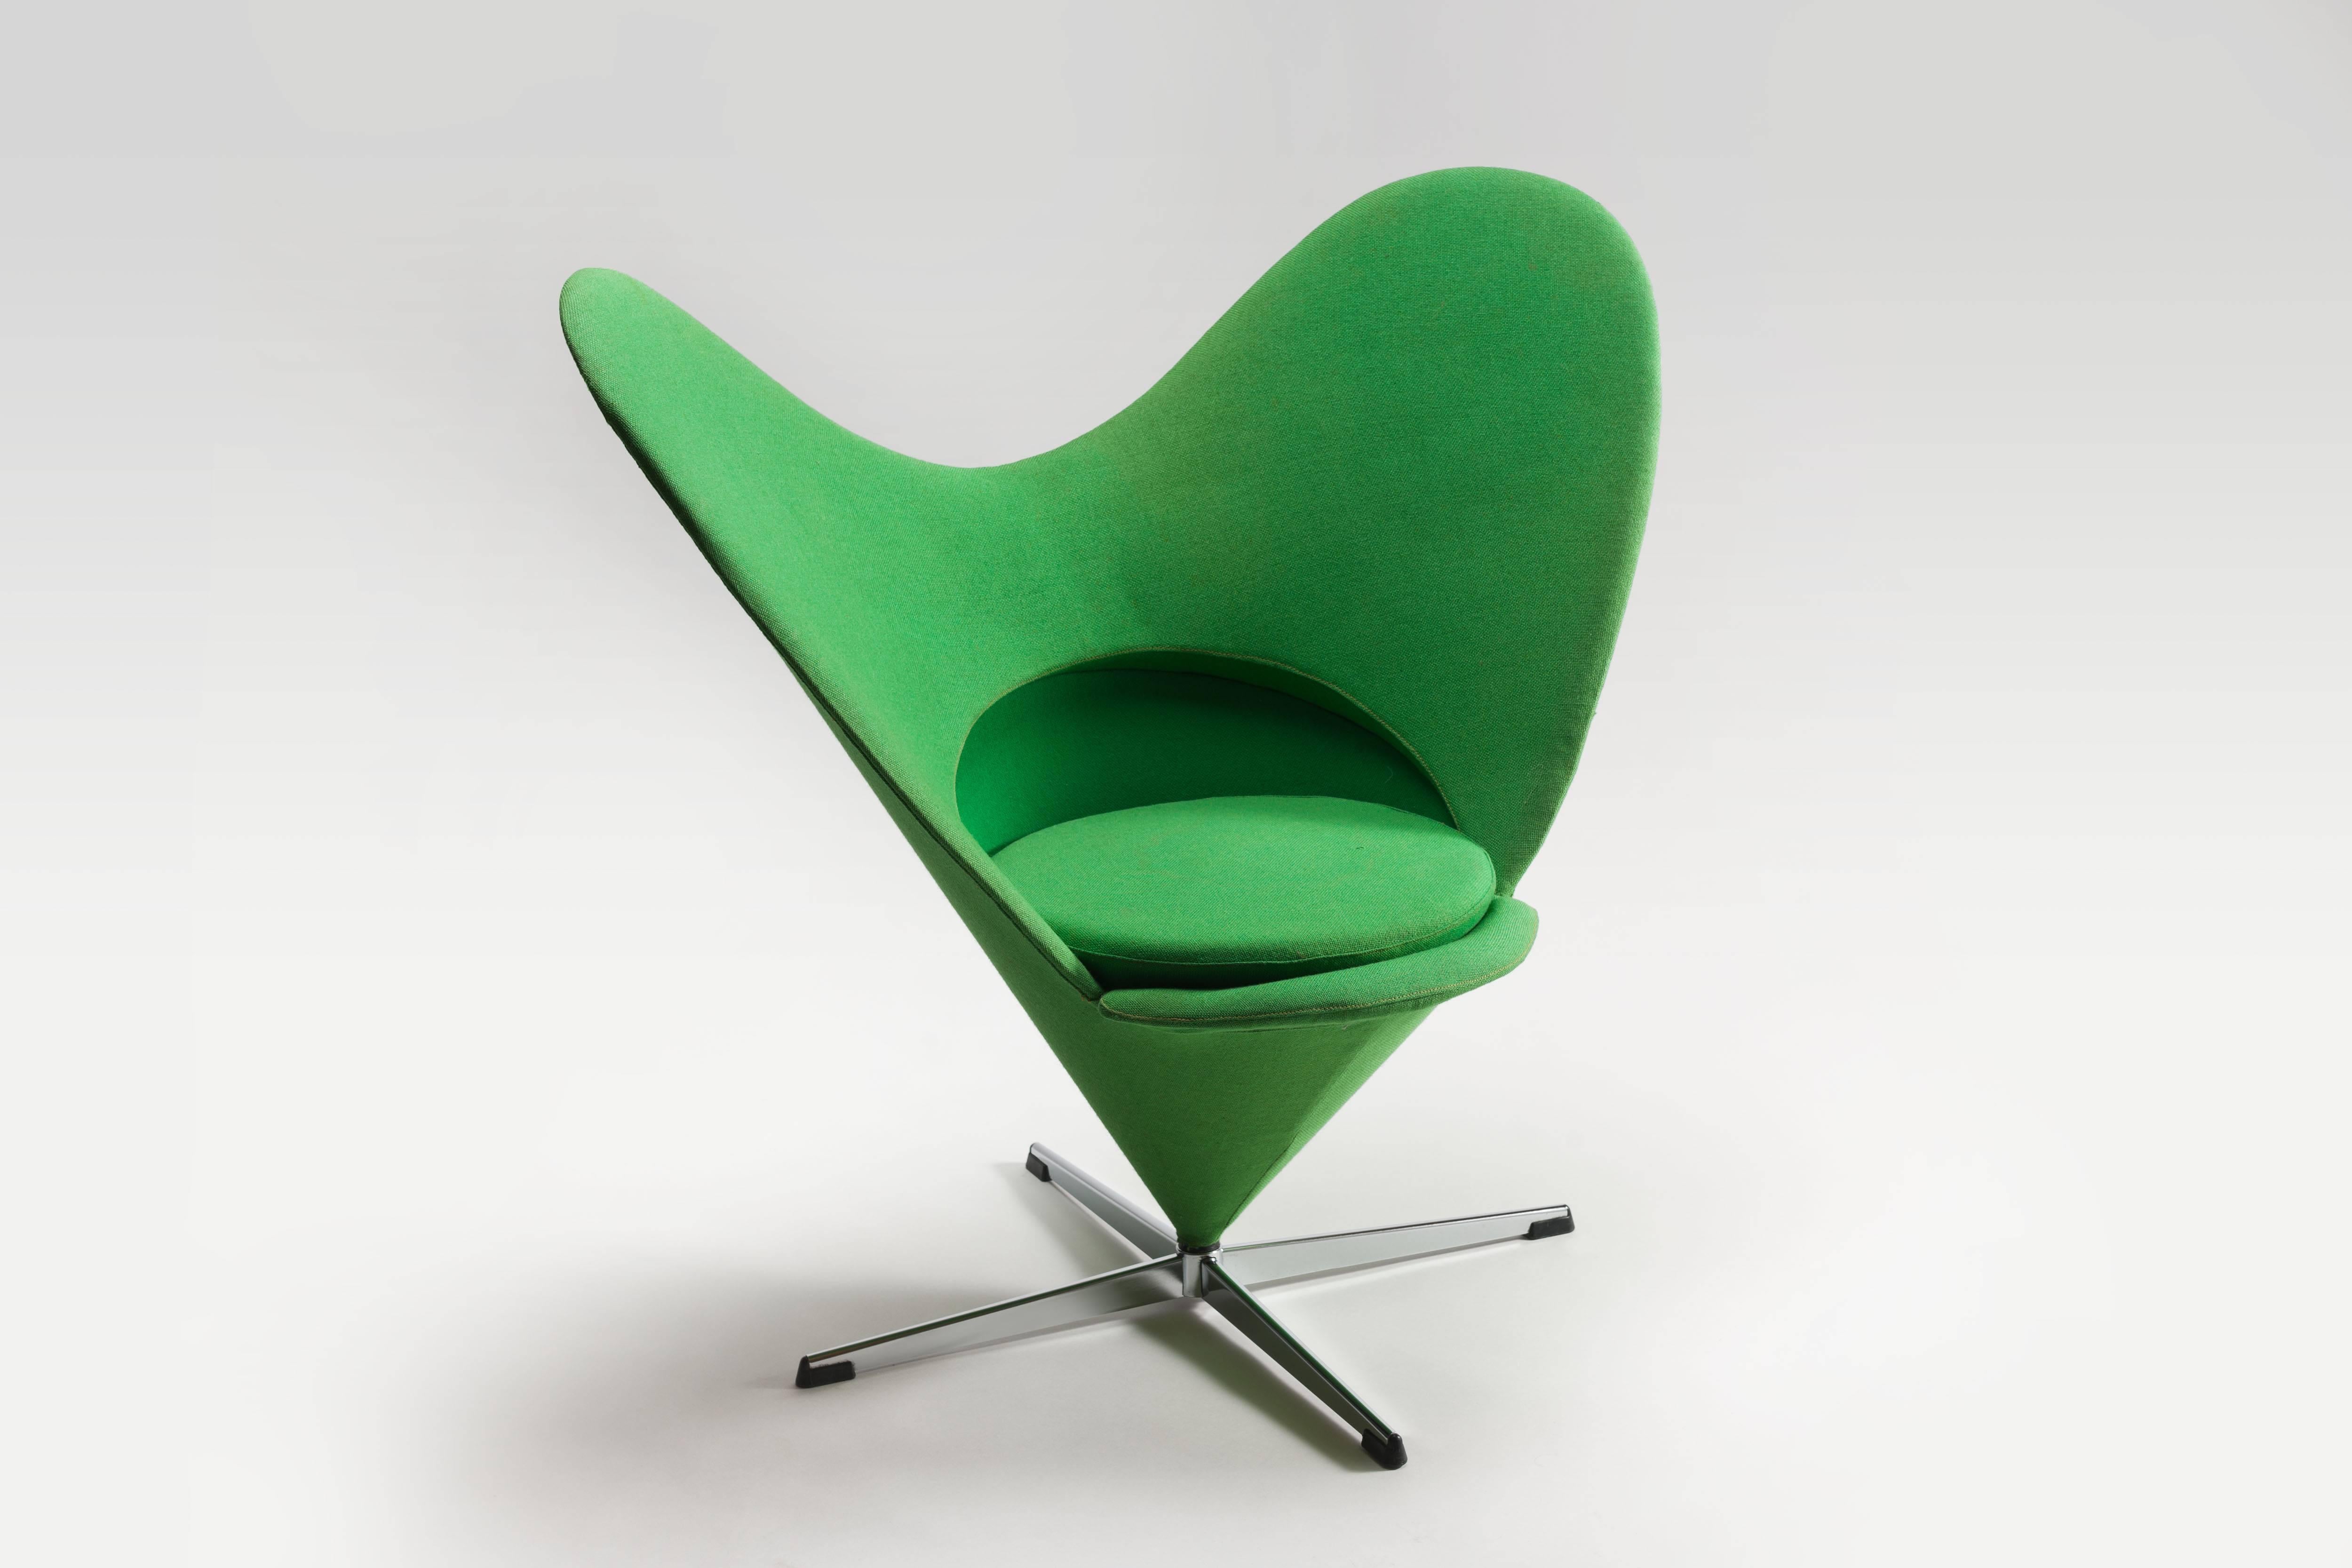 X
 
Verner Panton Heart Chair

Verner Panton designed the 'Heart Chair based upon his earlier designed 'Cone Chair' and consists of a cone-shaped metal frame which rotates at its base on a cross-shaped metal foot. With the Cone Chair chair Panton